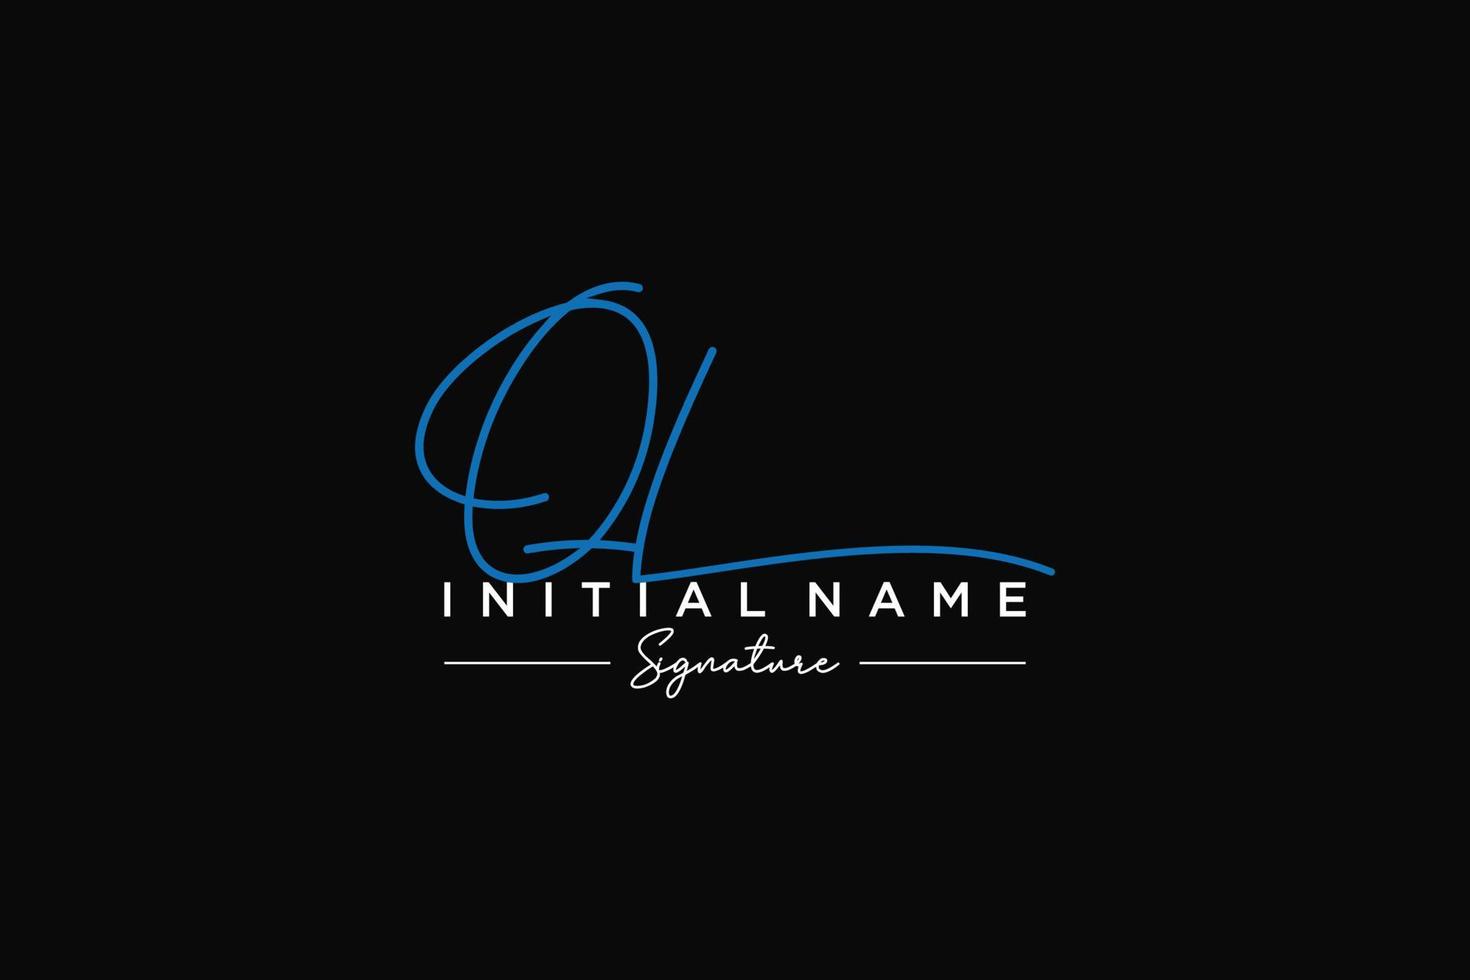 Initial QL signature logo template vector. Hand drawn Calligraphy lettering Vector illustration.